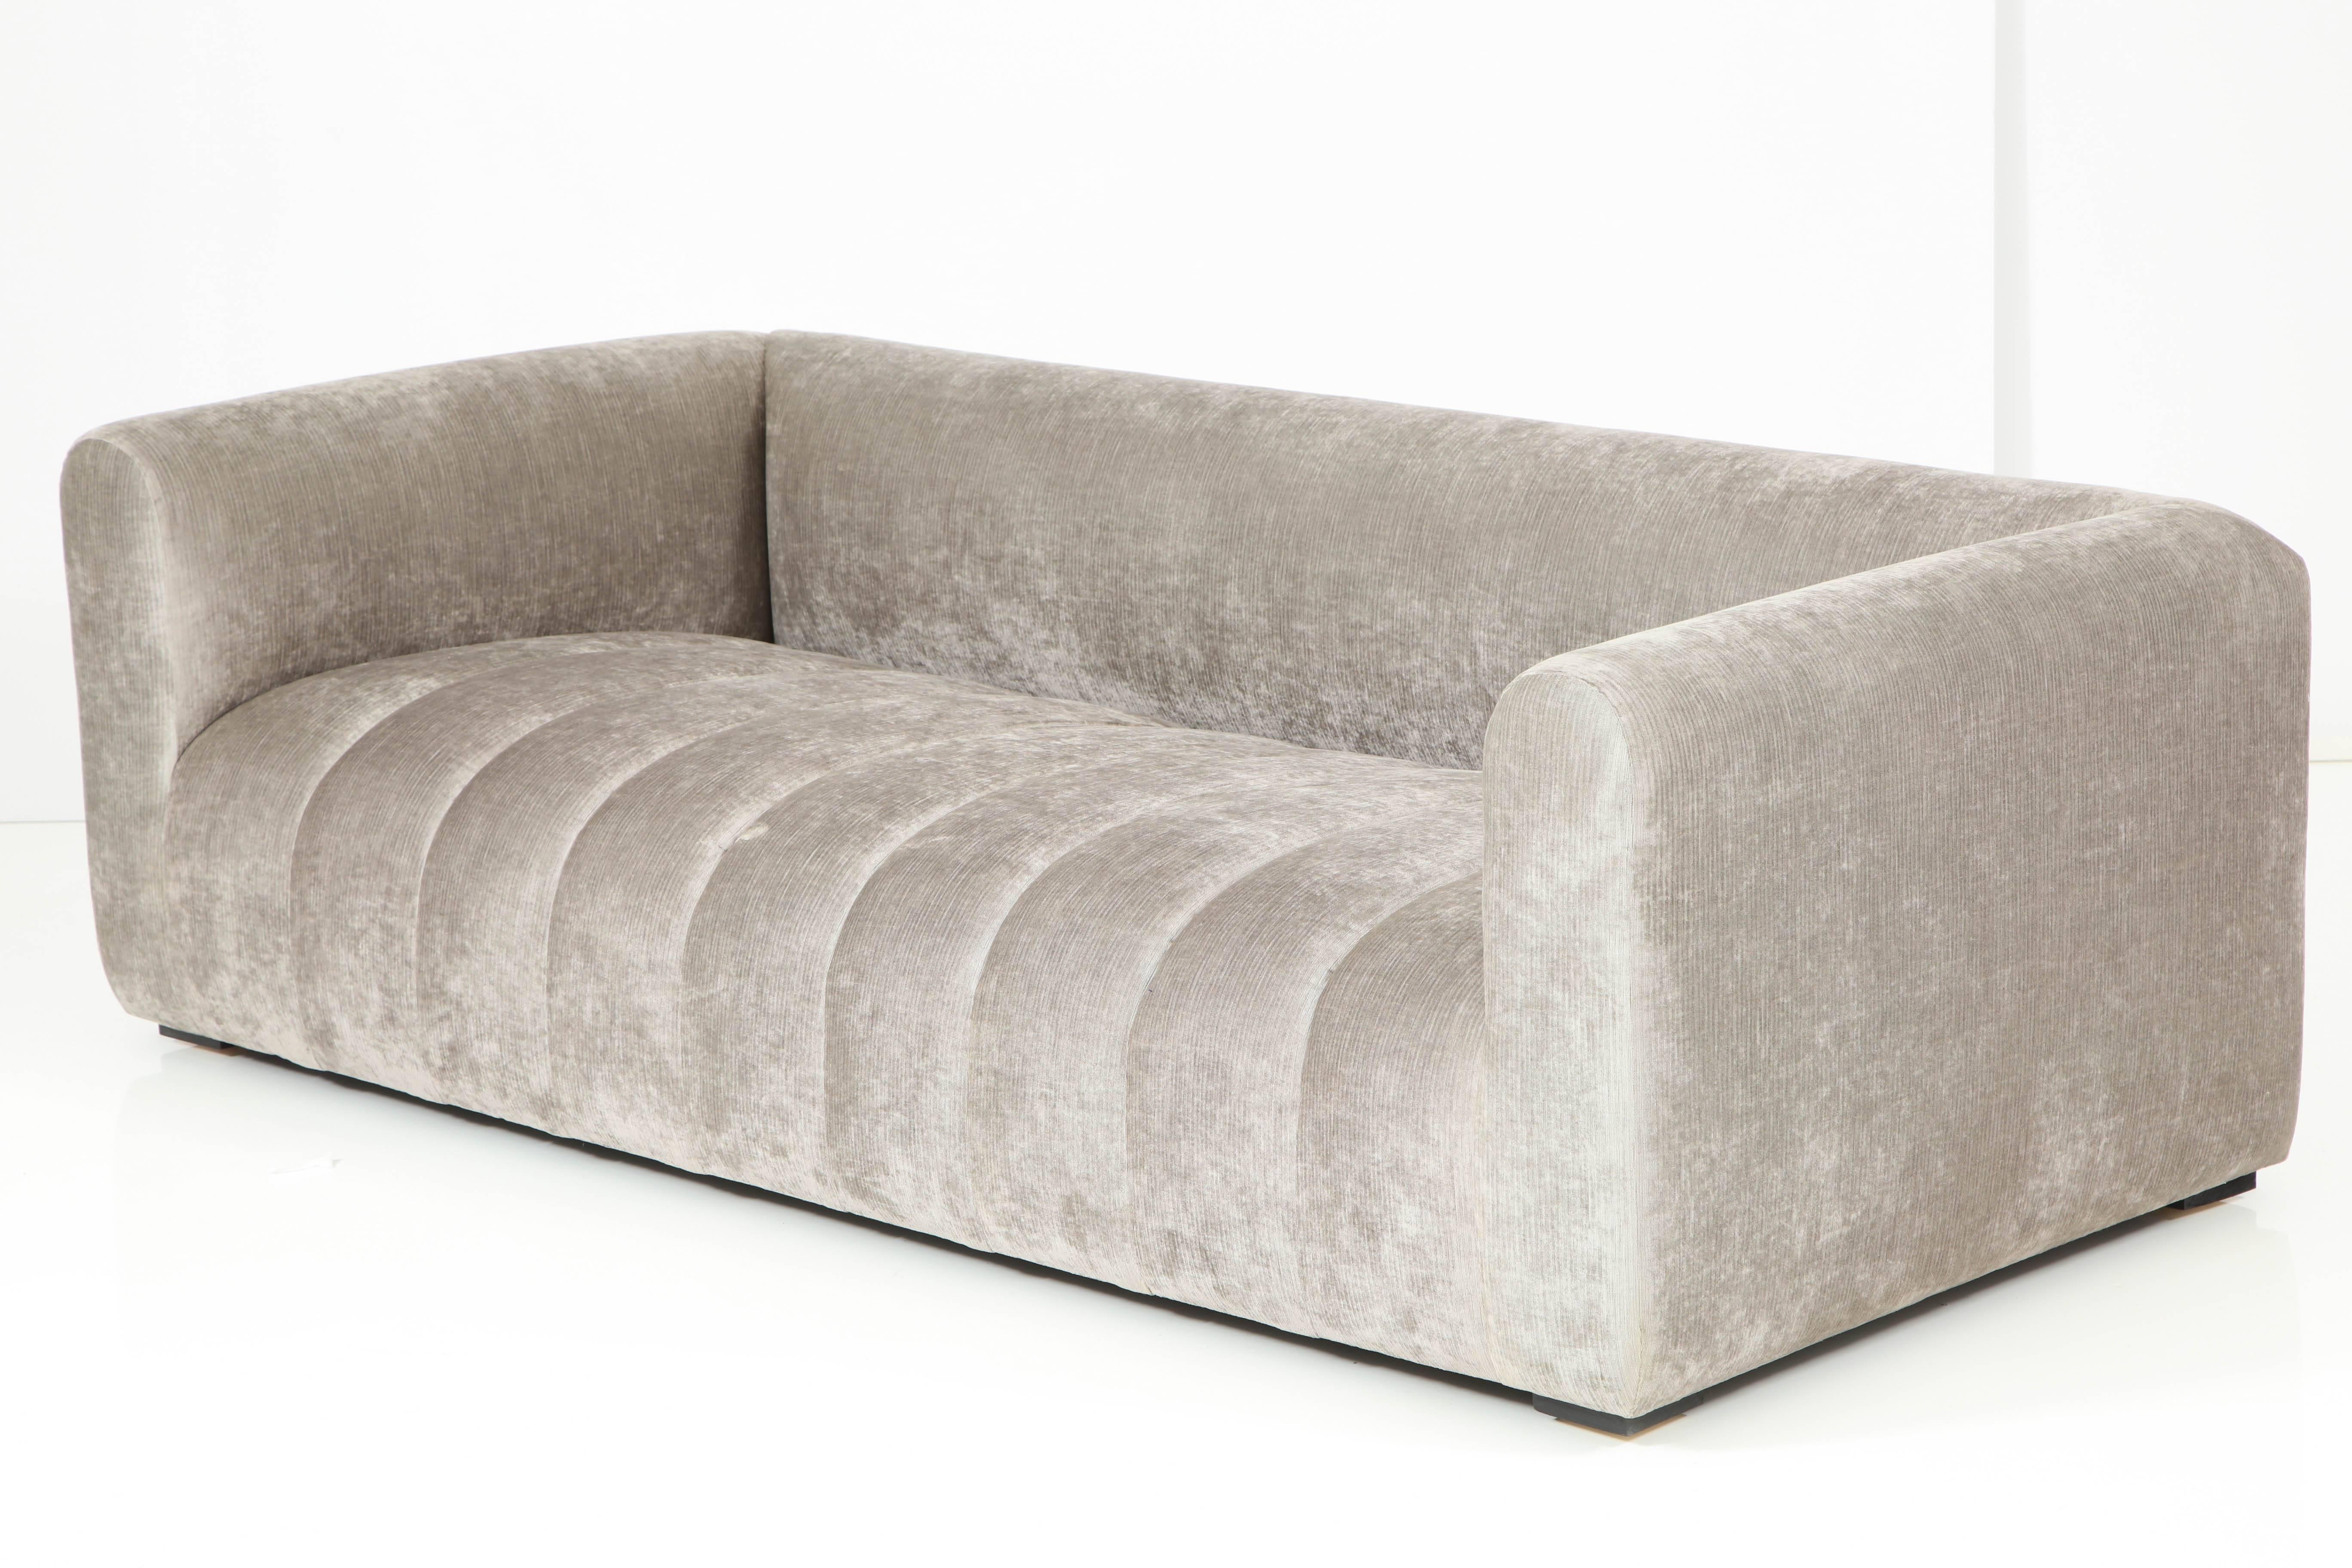 American Stunning Channel Sofa by Steve Chase offered by Prime Gallery